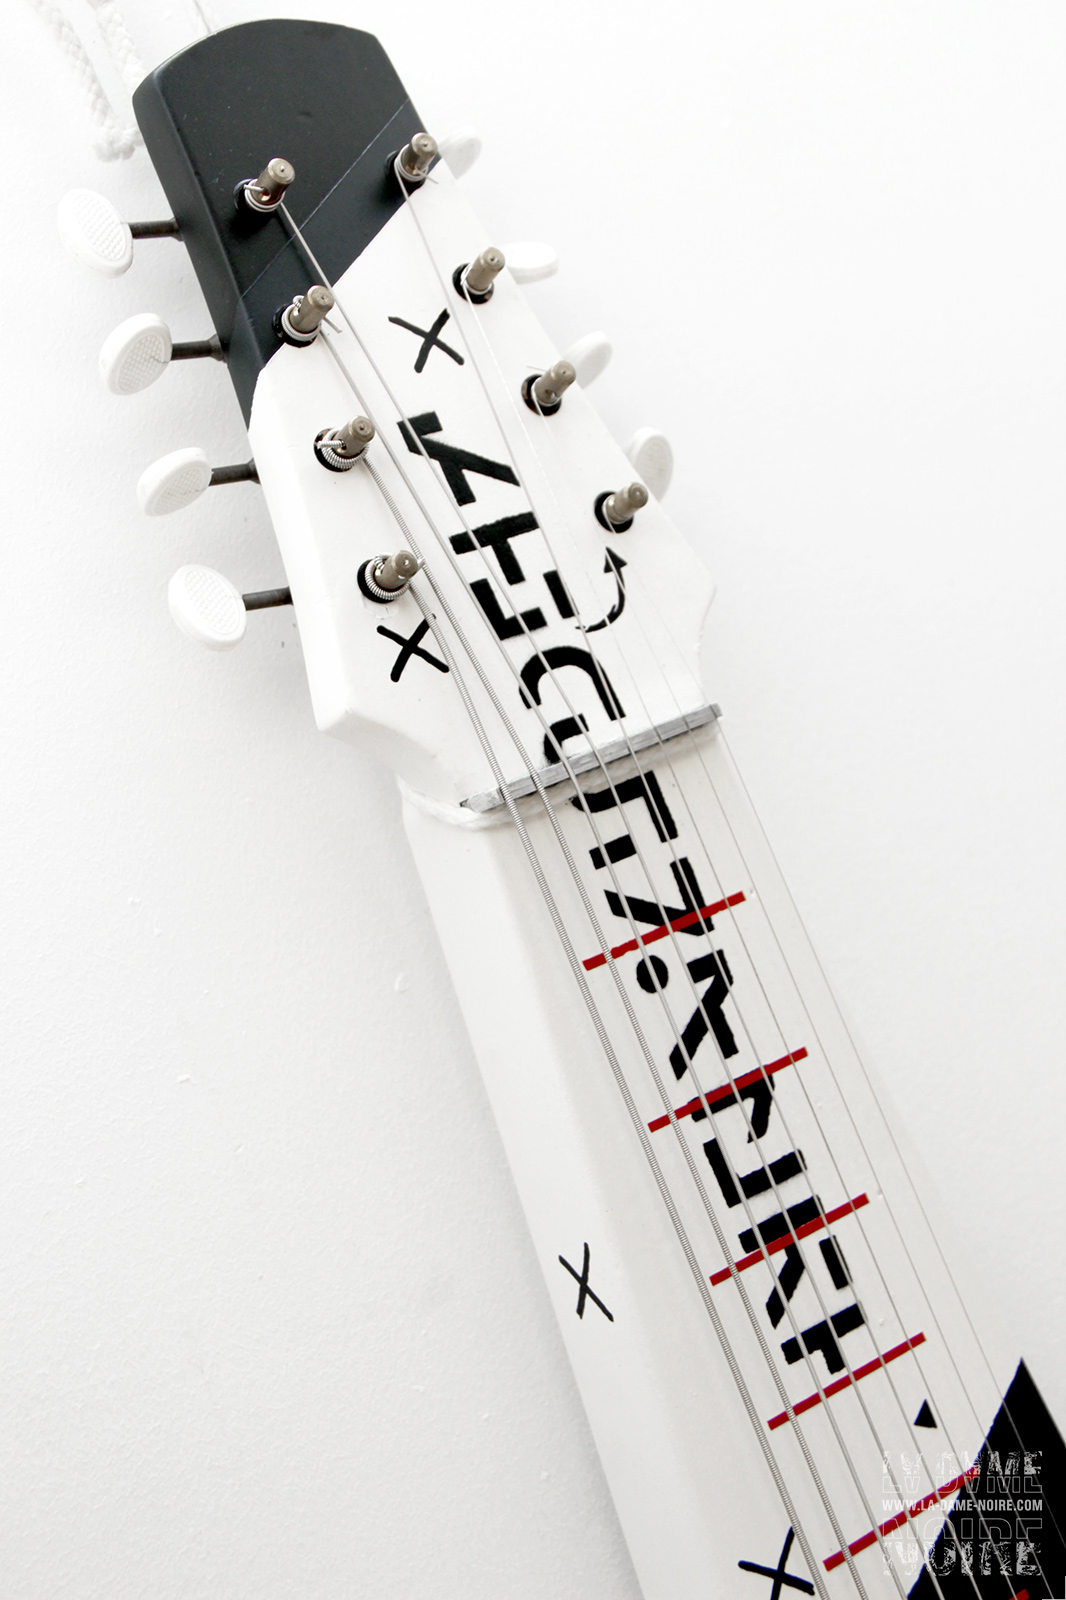 Head of the hawaian guitar painted in white, black and red stripes